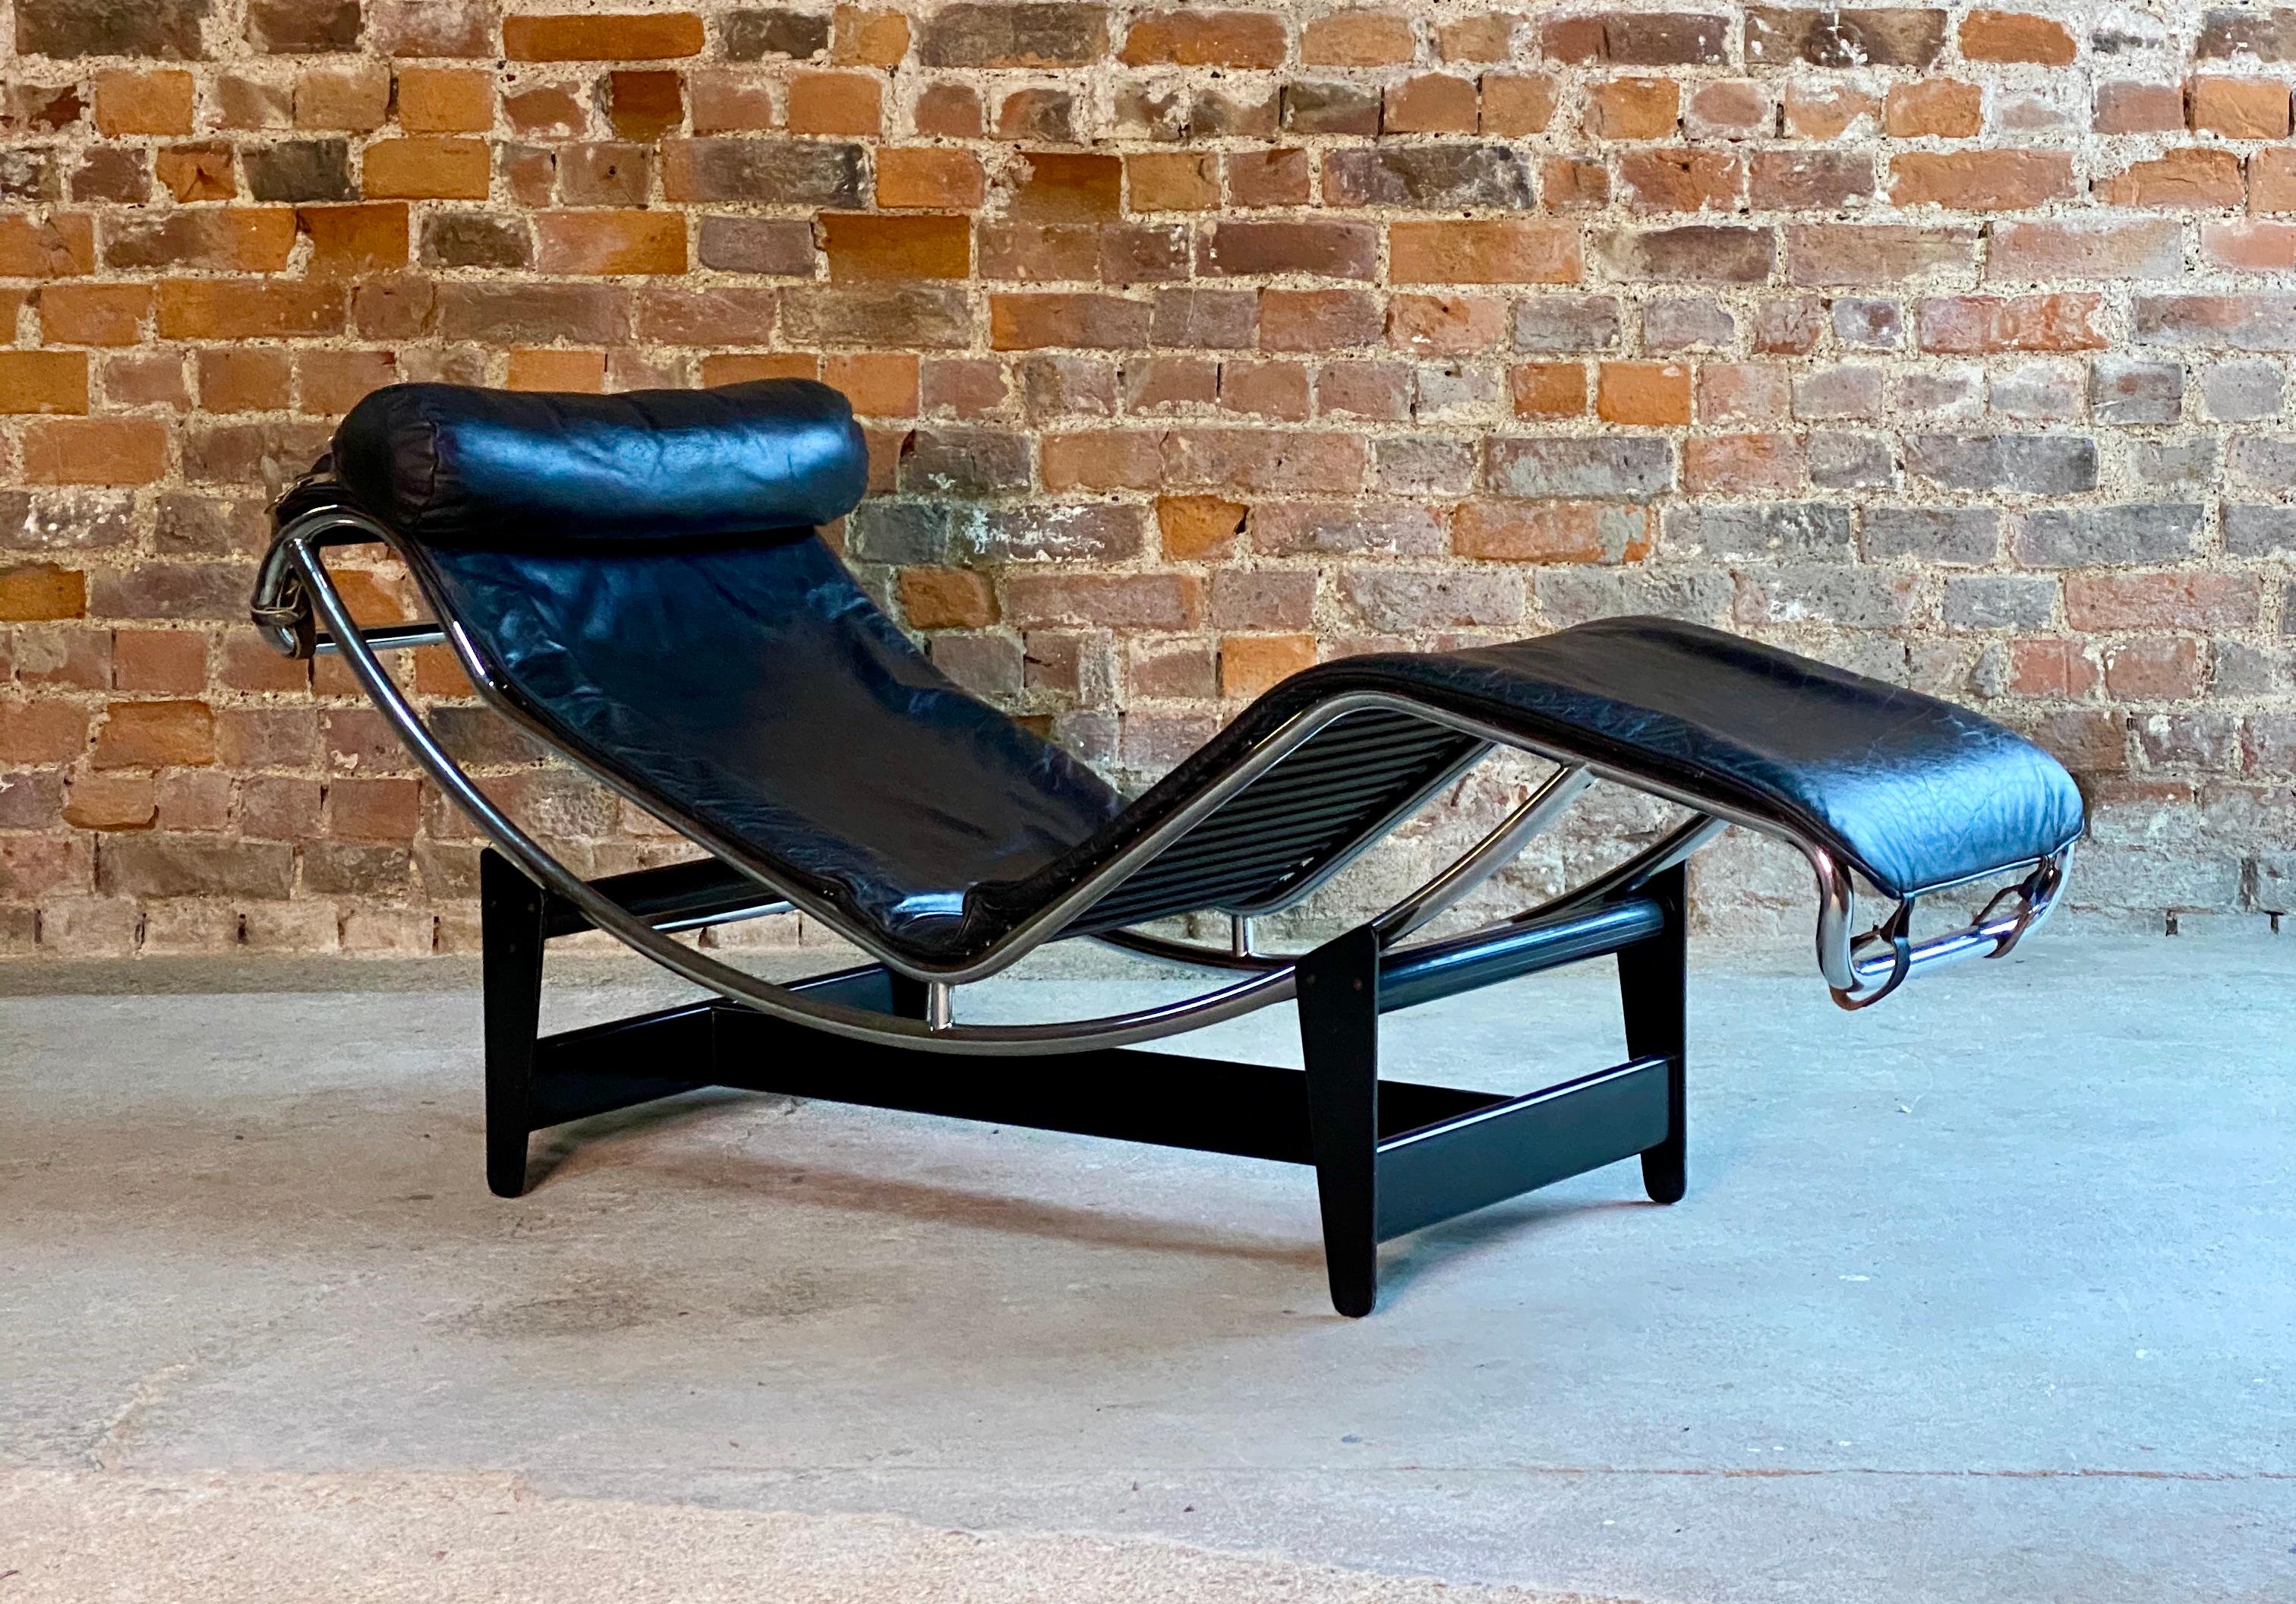 Original Le Corbusier LC4 chaise loungemade by Cassina circa 1965

The definitive Le Corbusier, Pierre Jeanneret and Charlotte Perriand design LC4 chaise loungedesigned in 1928 and produced by Cassina circa 1965. The LC4 with original black